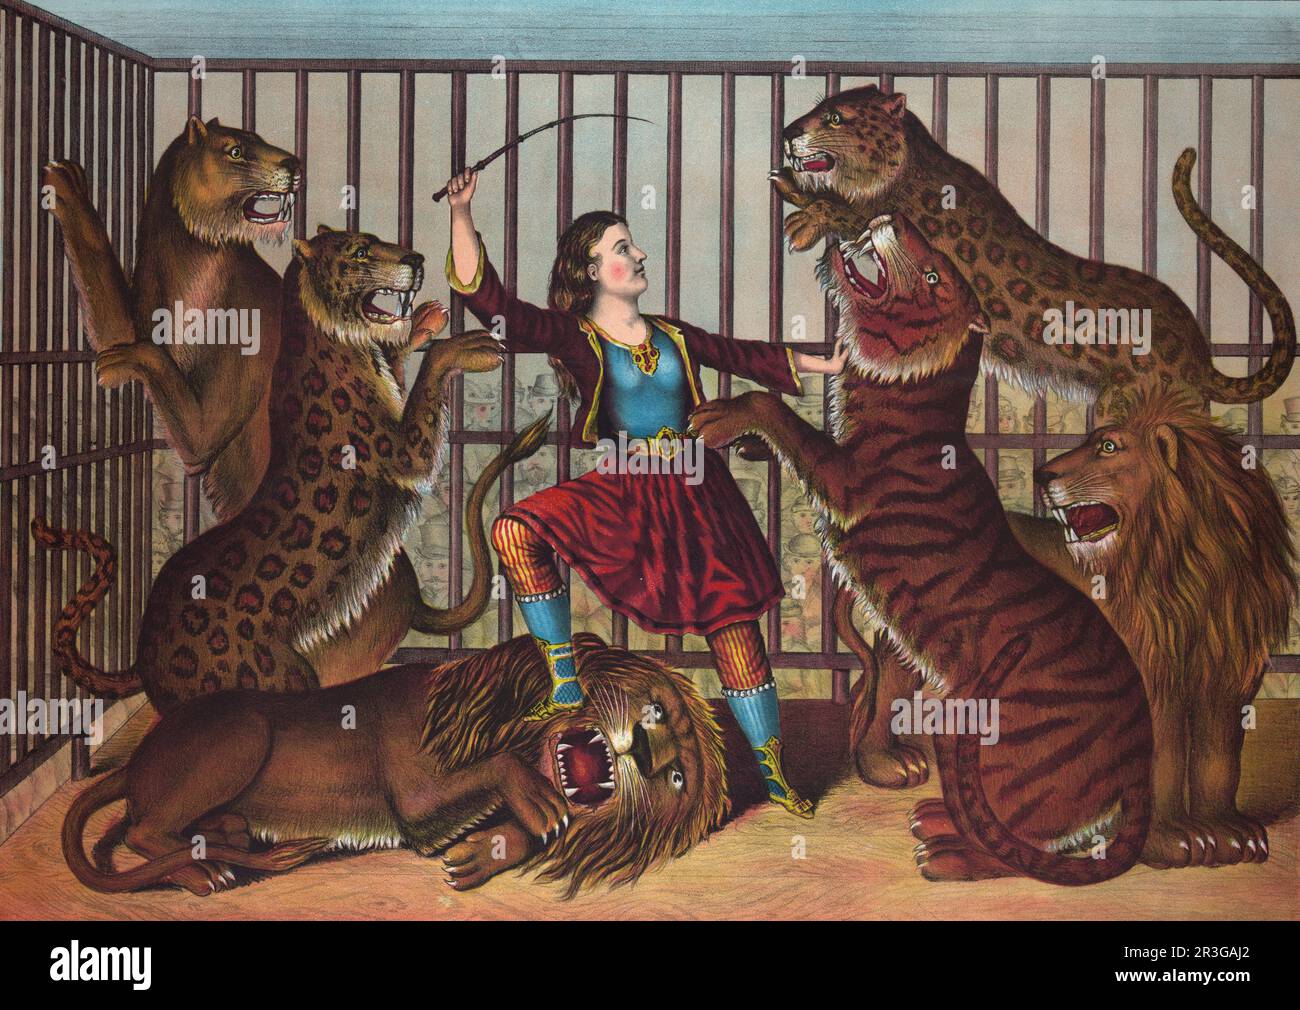 Vintage print showing a woman lion-tamer in a cage with several lions and tigers, circa 1874. Stock Photo